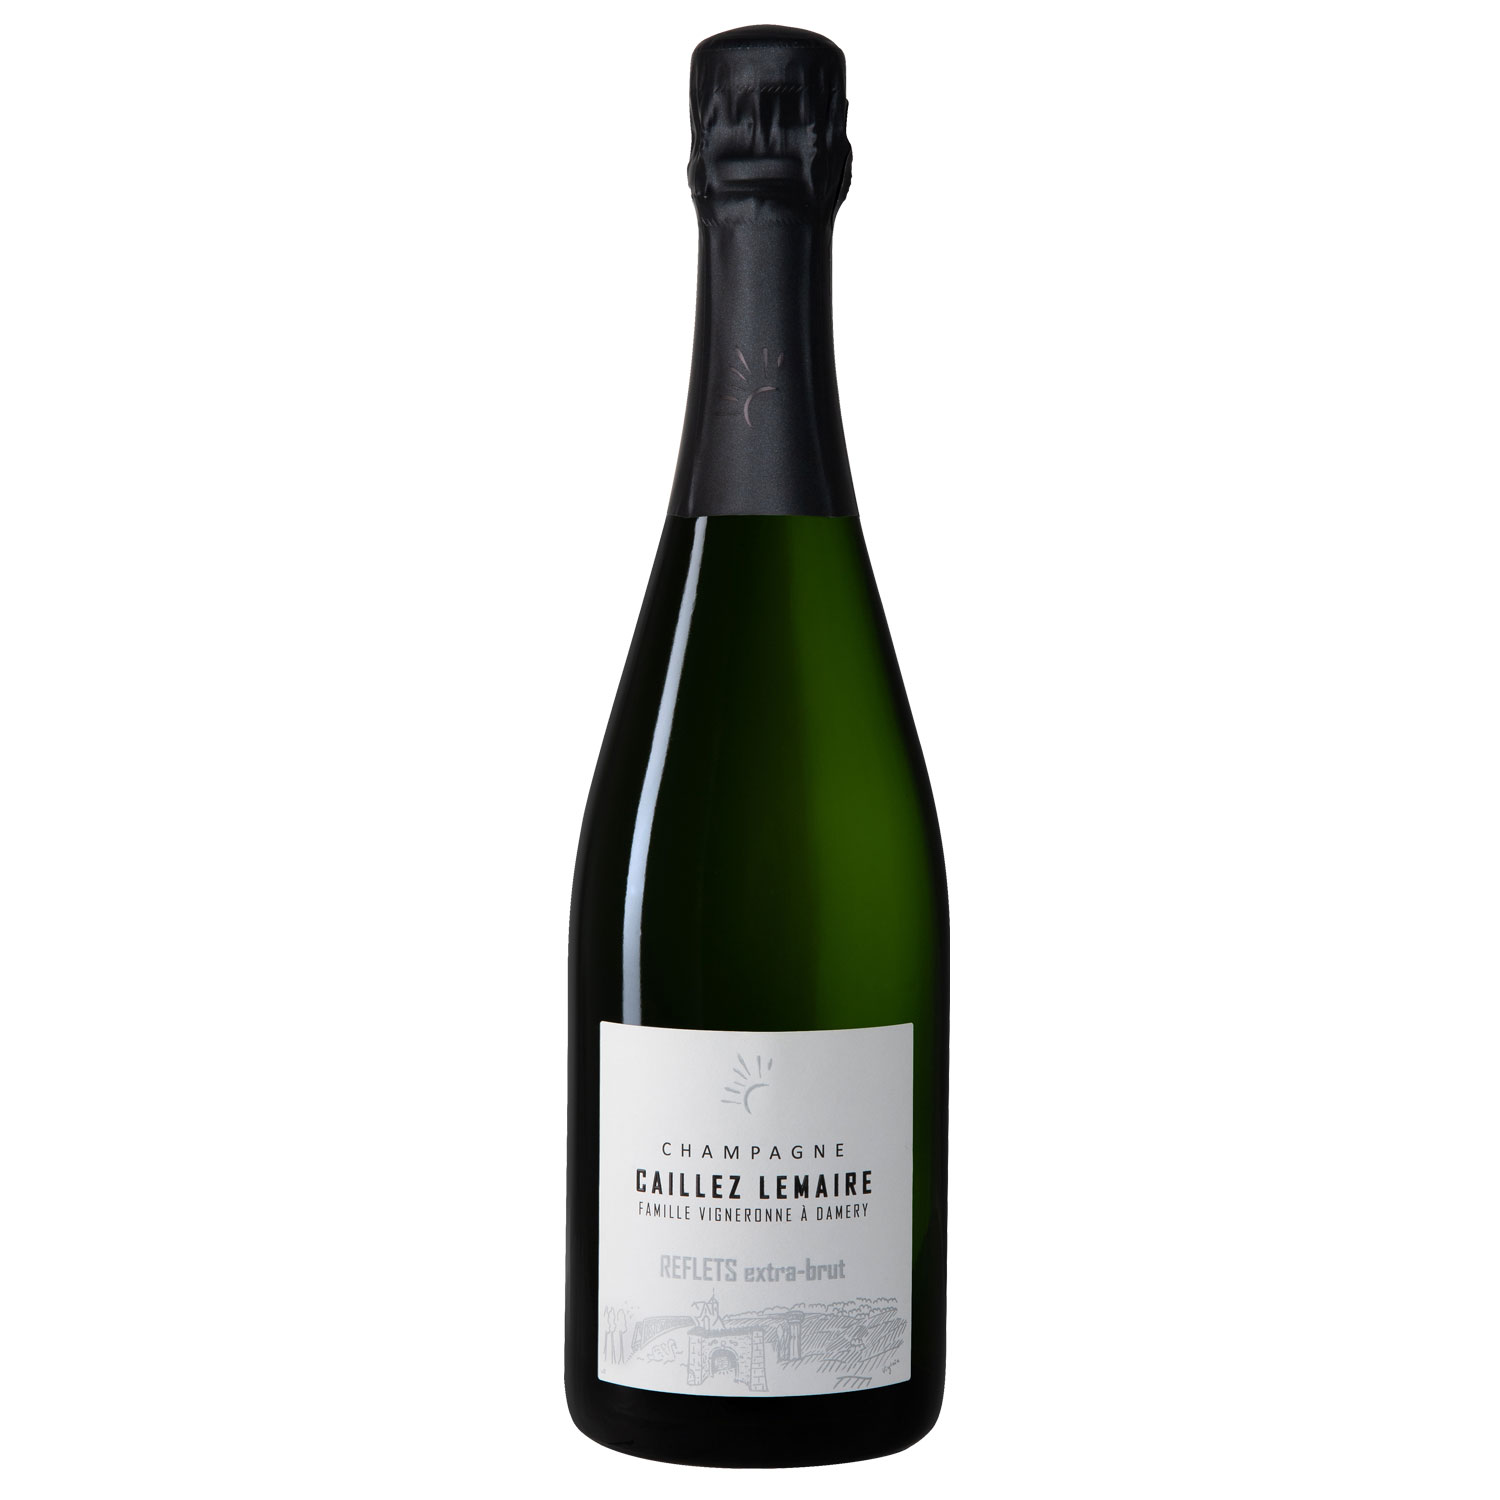 Champagne Caillez-Lemaire Reflets Extra Brut